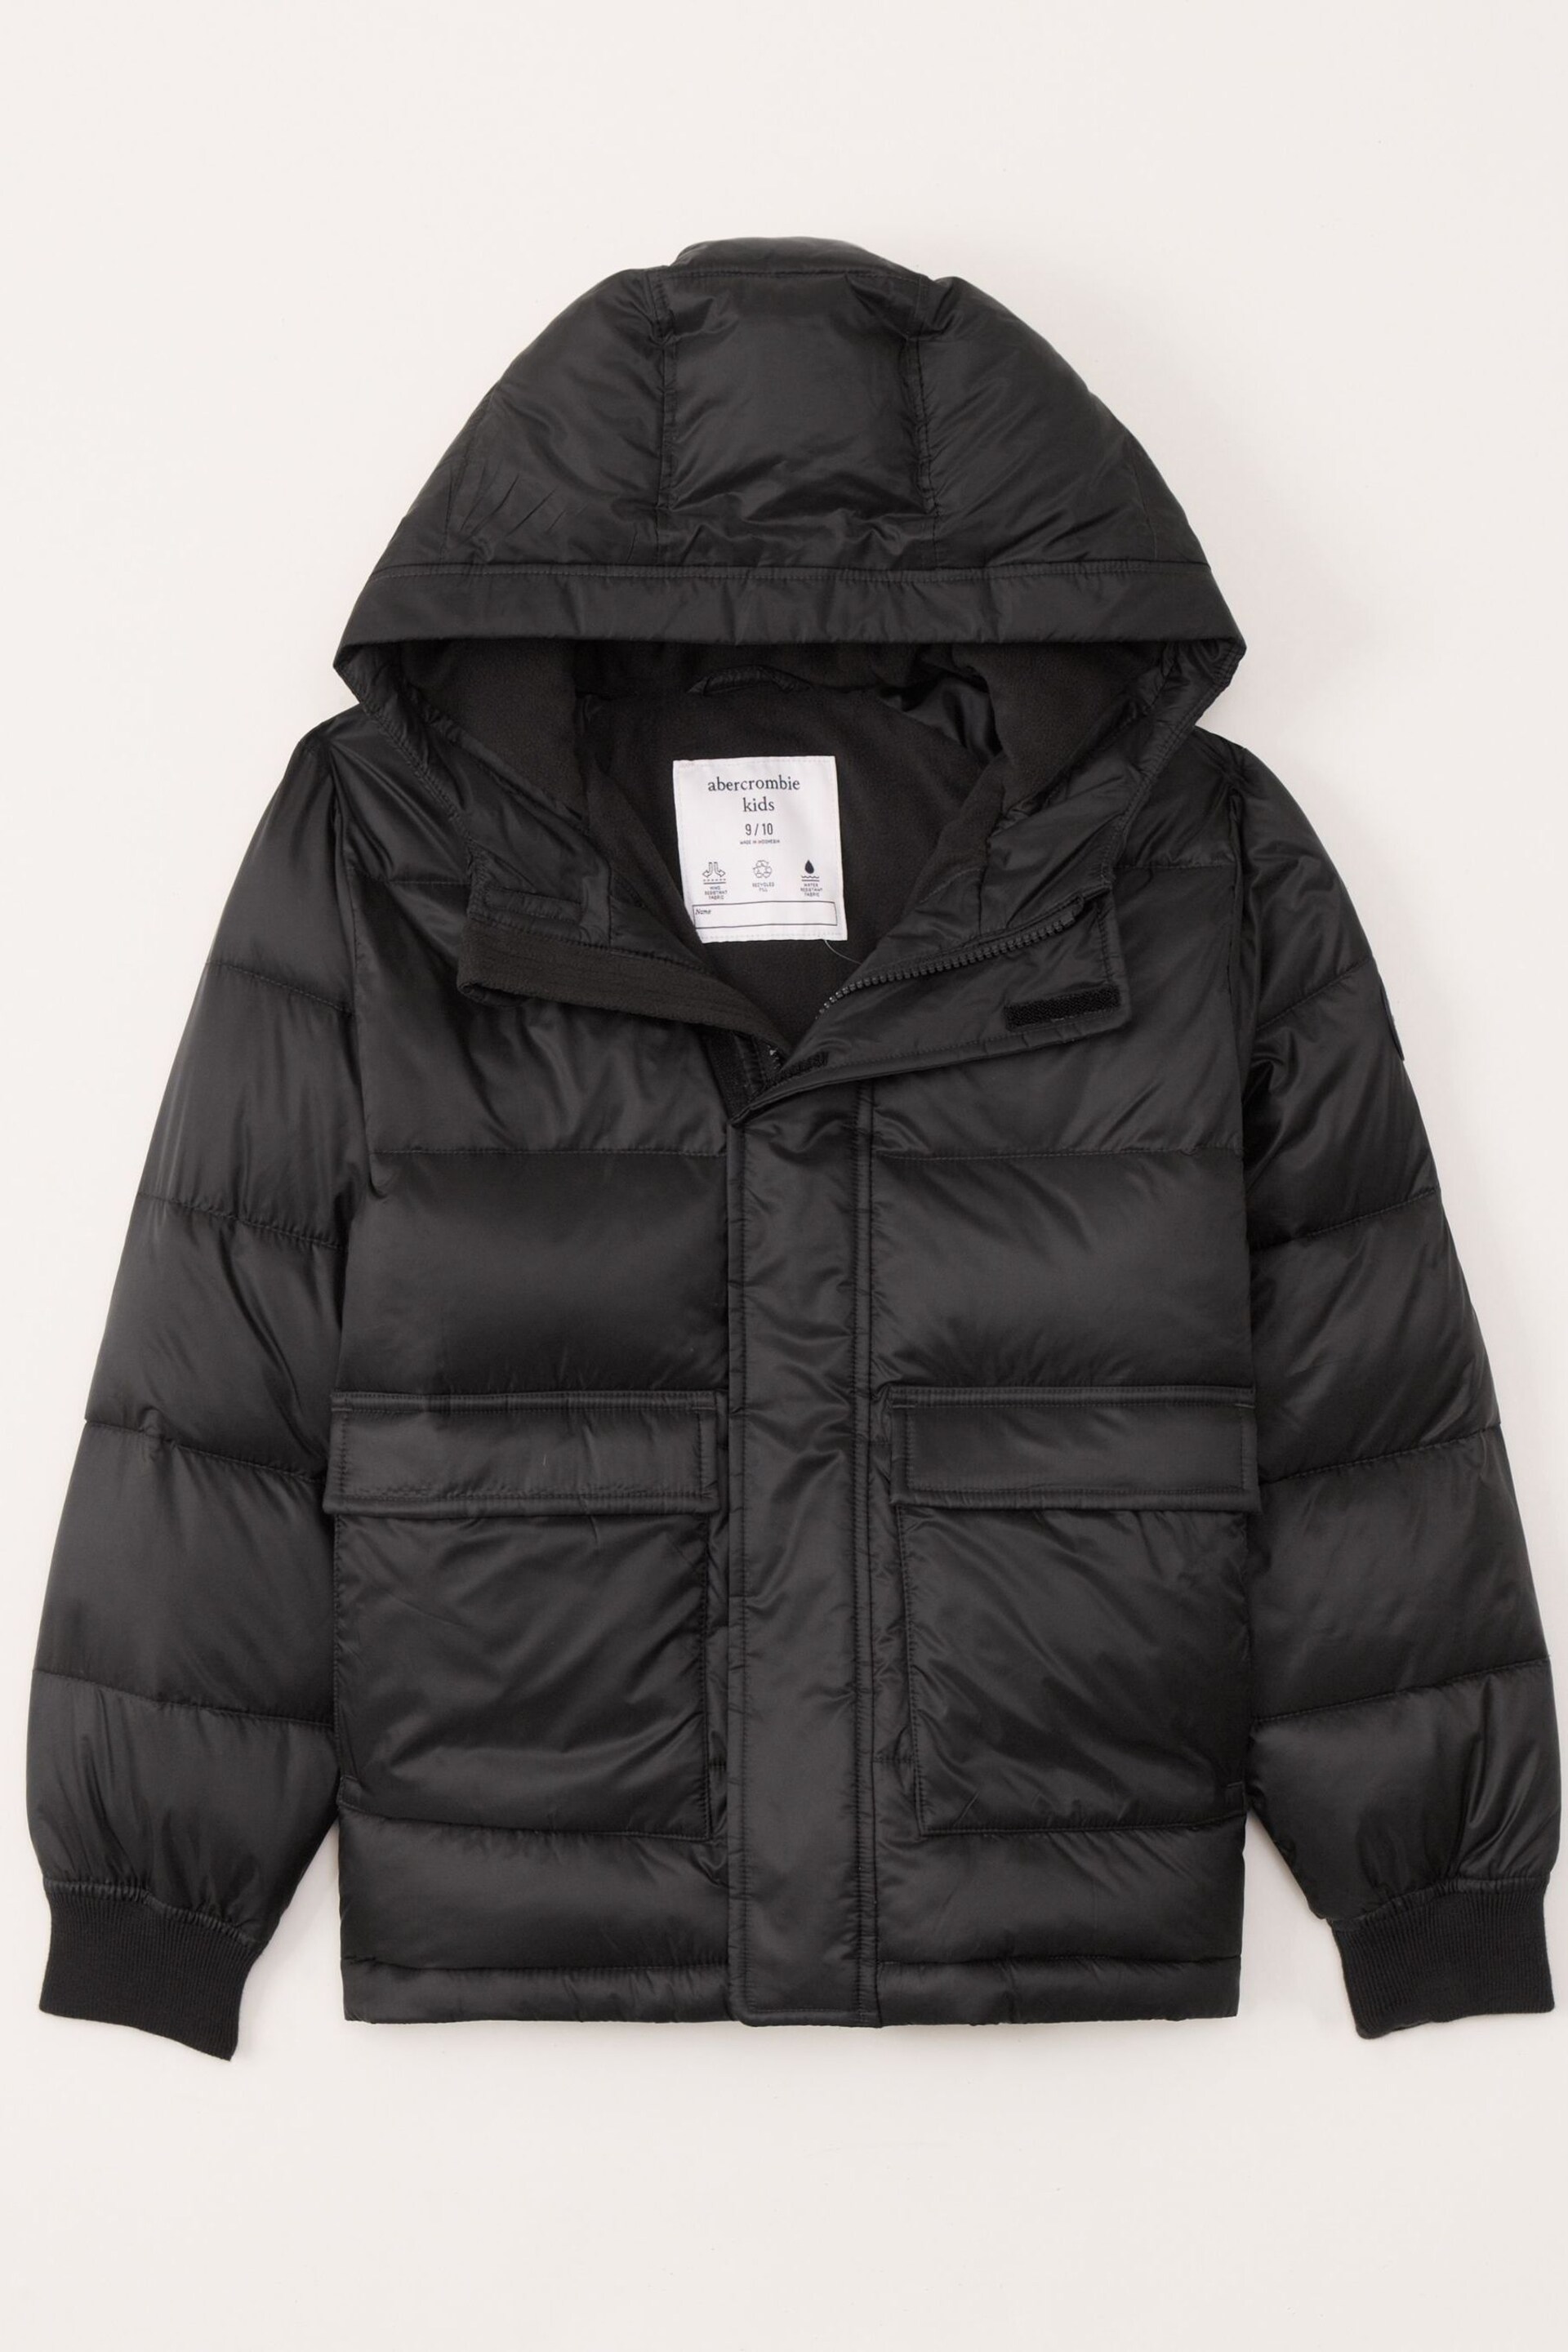 Abercrombie & Fitch Front Pocket Padded Coat - Image 1 of 6